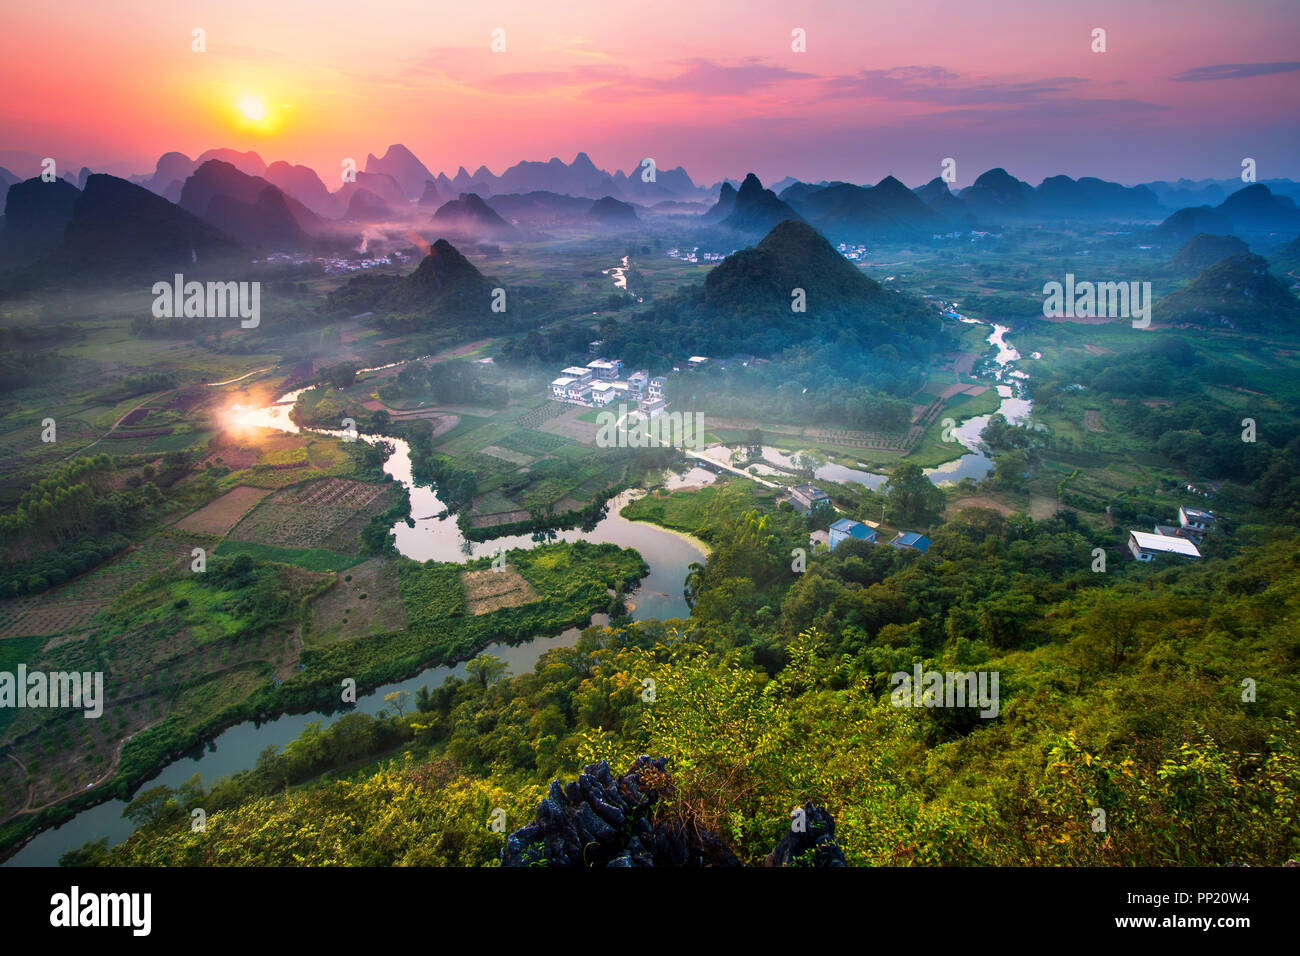 Panorama Landscape of Guilin, China. Li River and Karst mountains called Cuiping or Five Finger mount located at Guangxi Province, China. Stock Photo